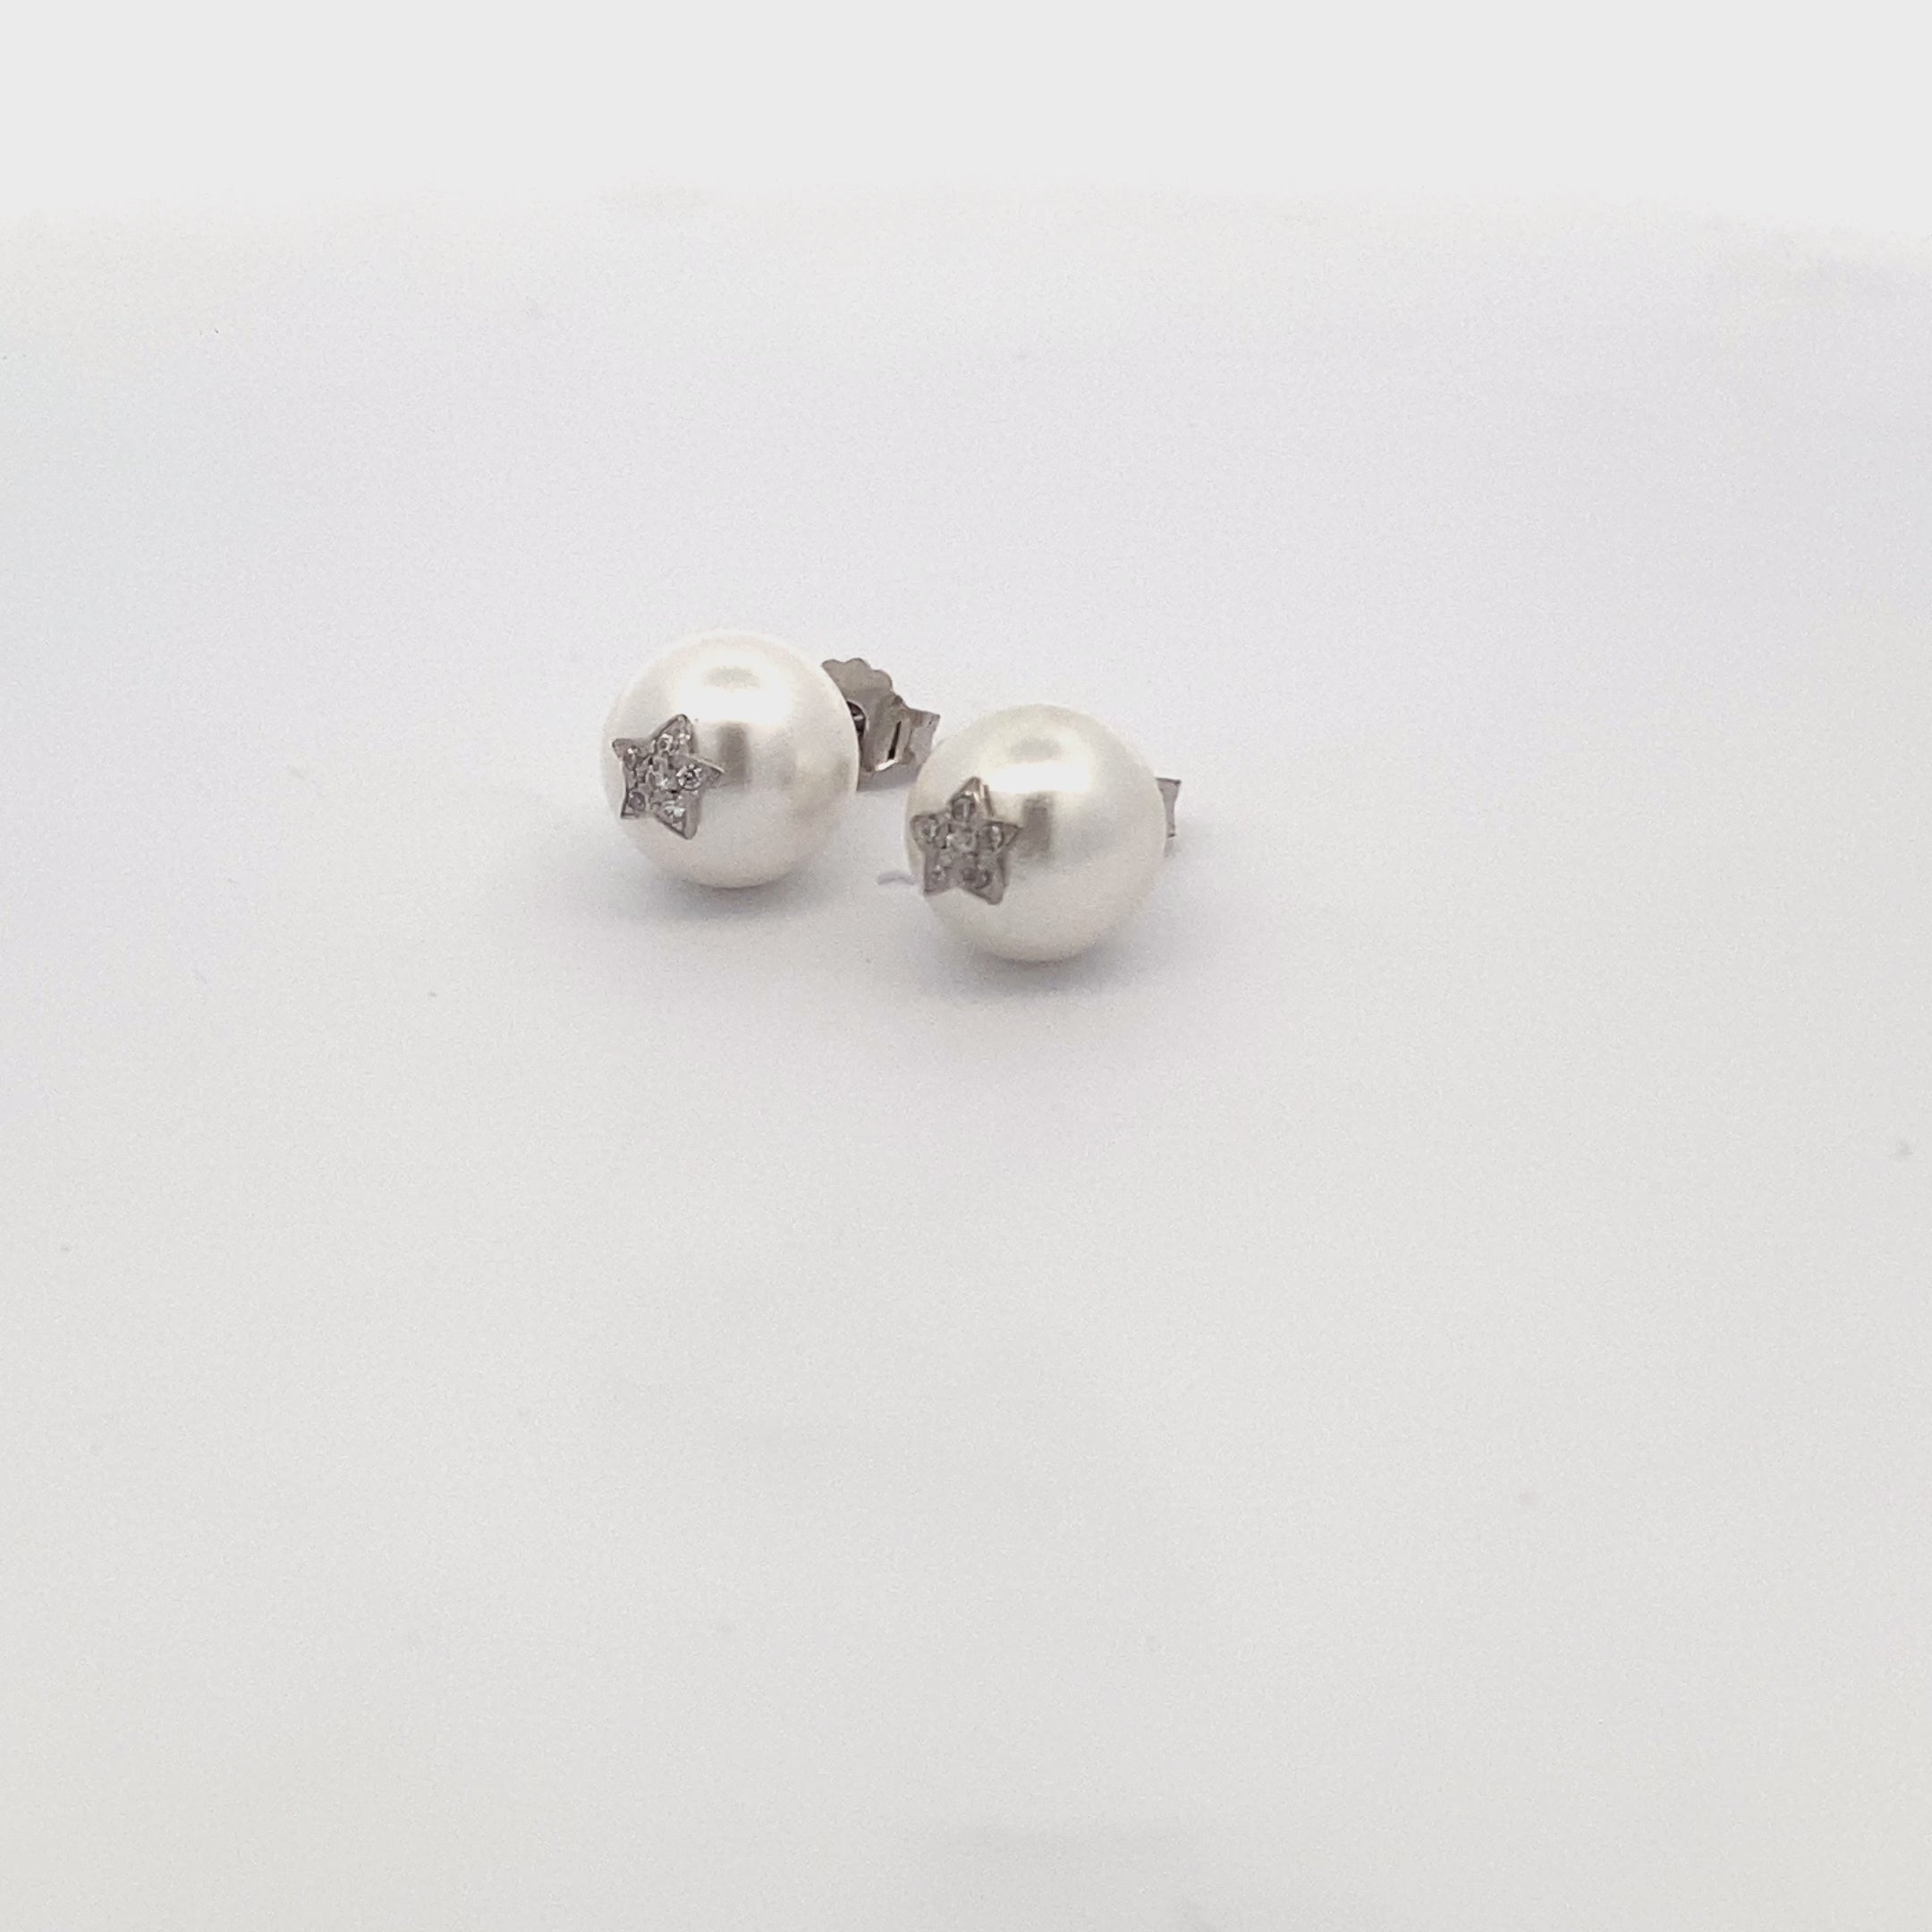 Earrings - LOBE EARRINGS PEARLS AND STARS - GALACTICA ICE - thumbnail - video - 1 | Rue des Mille